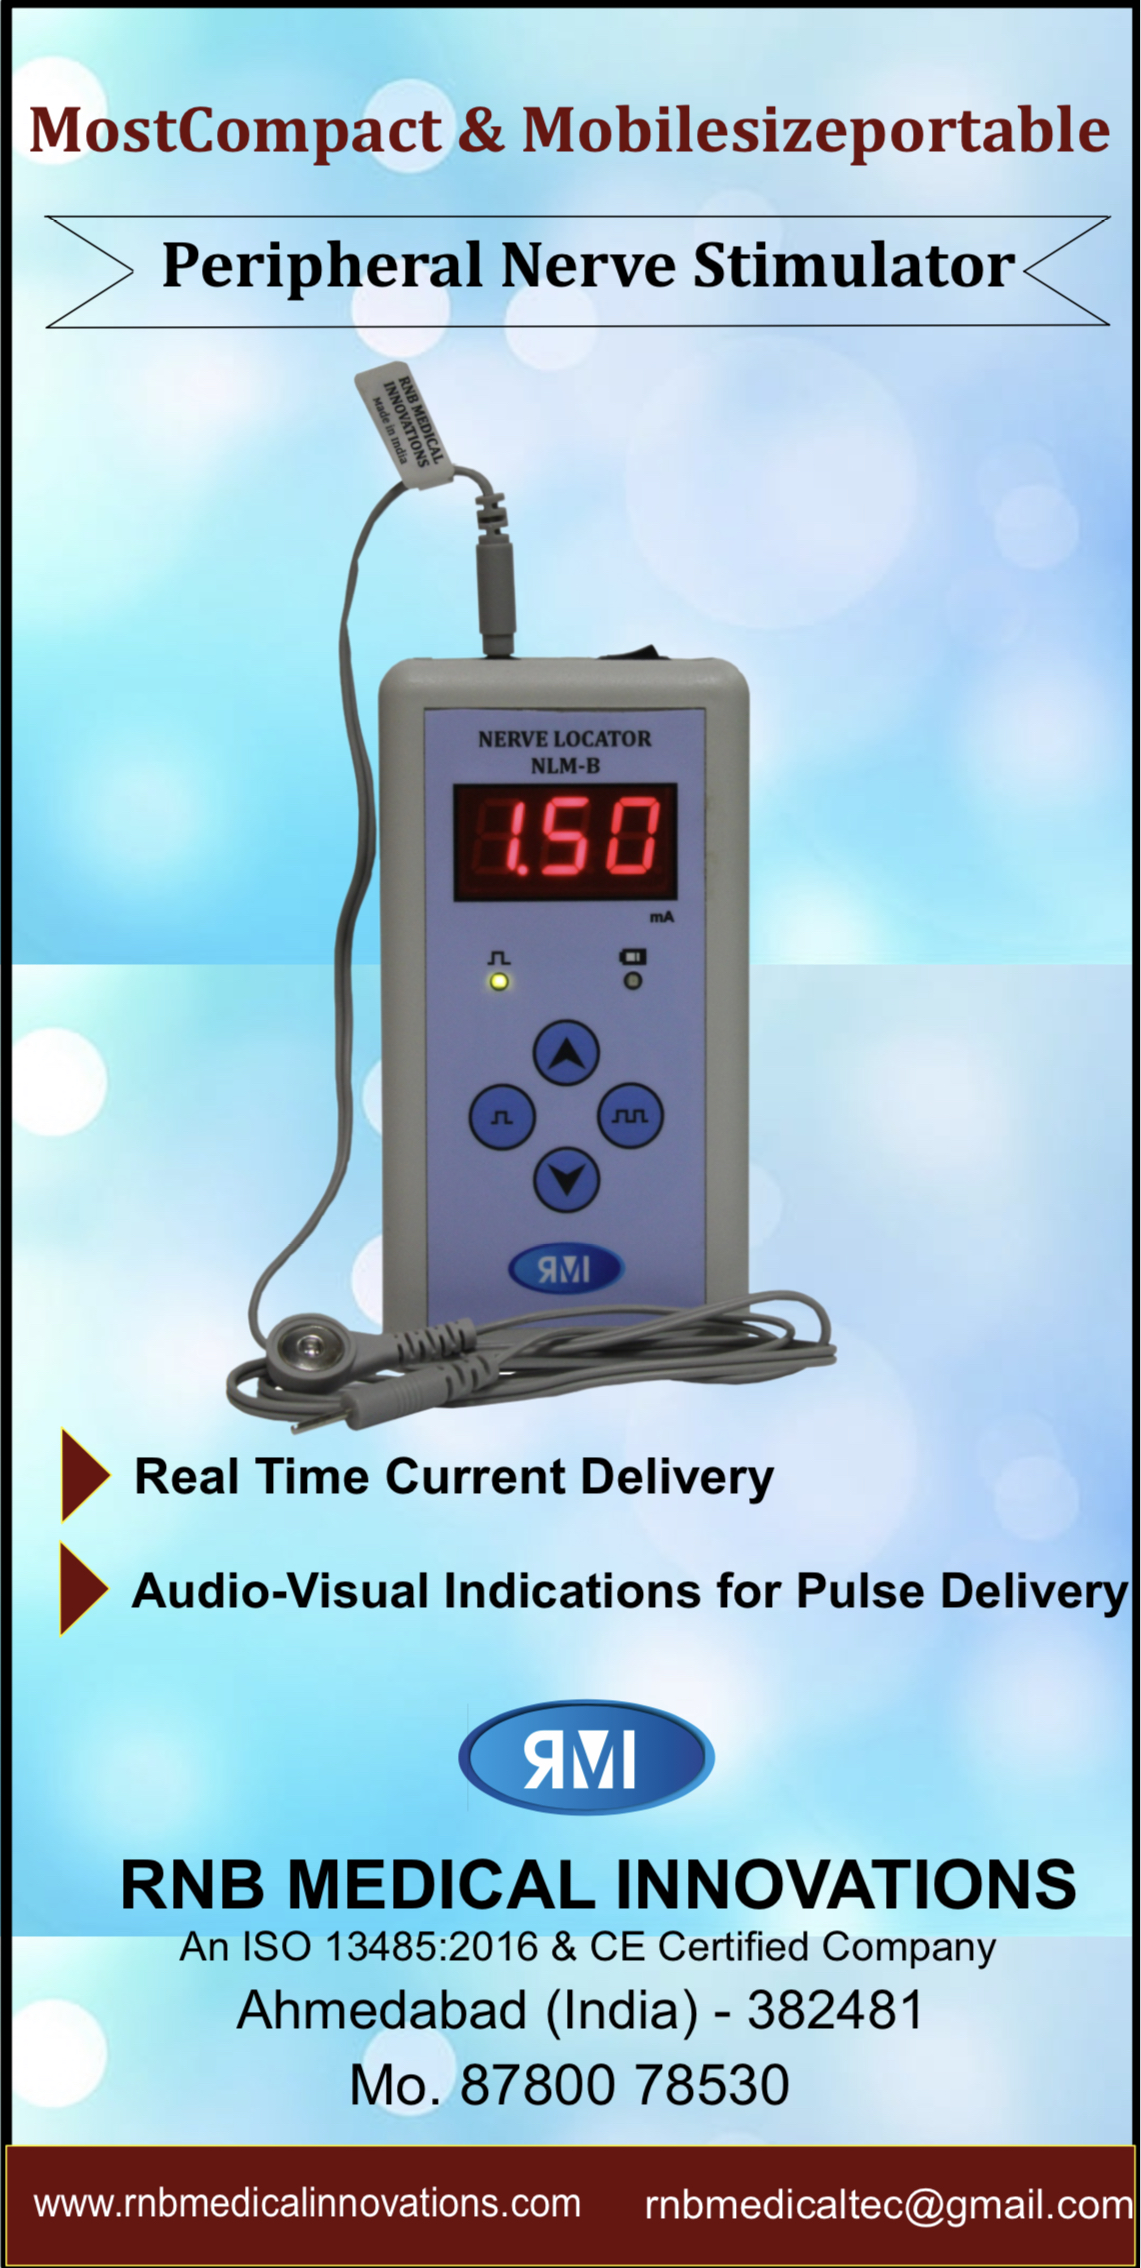 RNB Medical Innovations NLM-B Peripheral Nerve Stimulator with 1 month  return policy at best price.